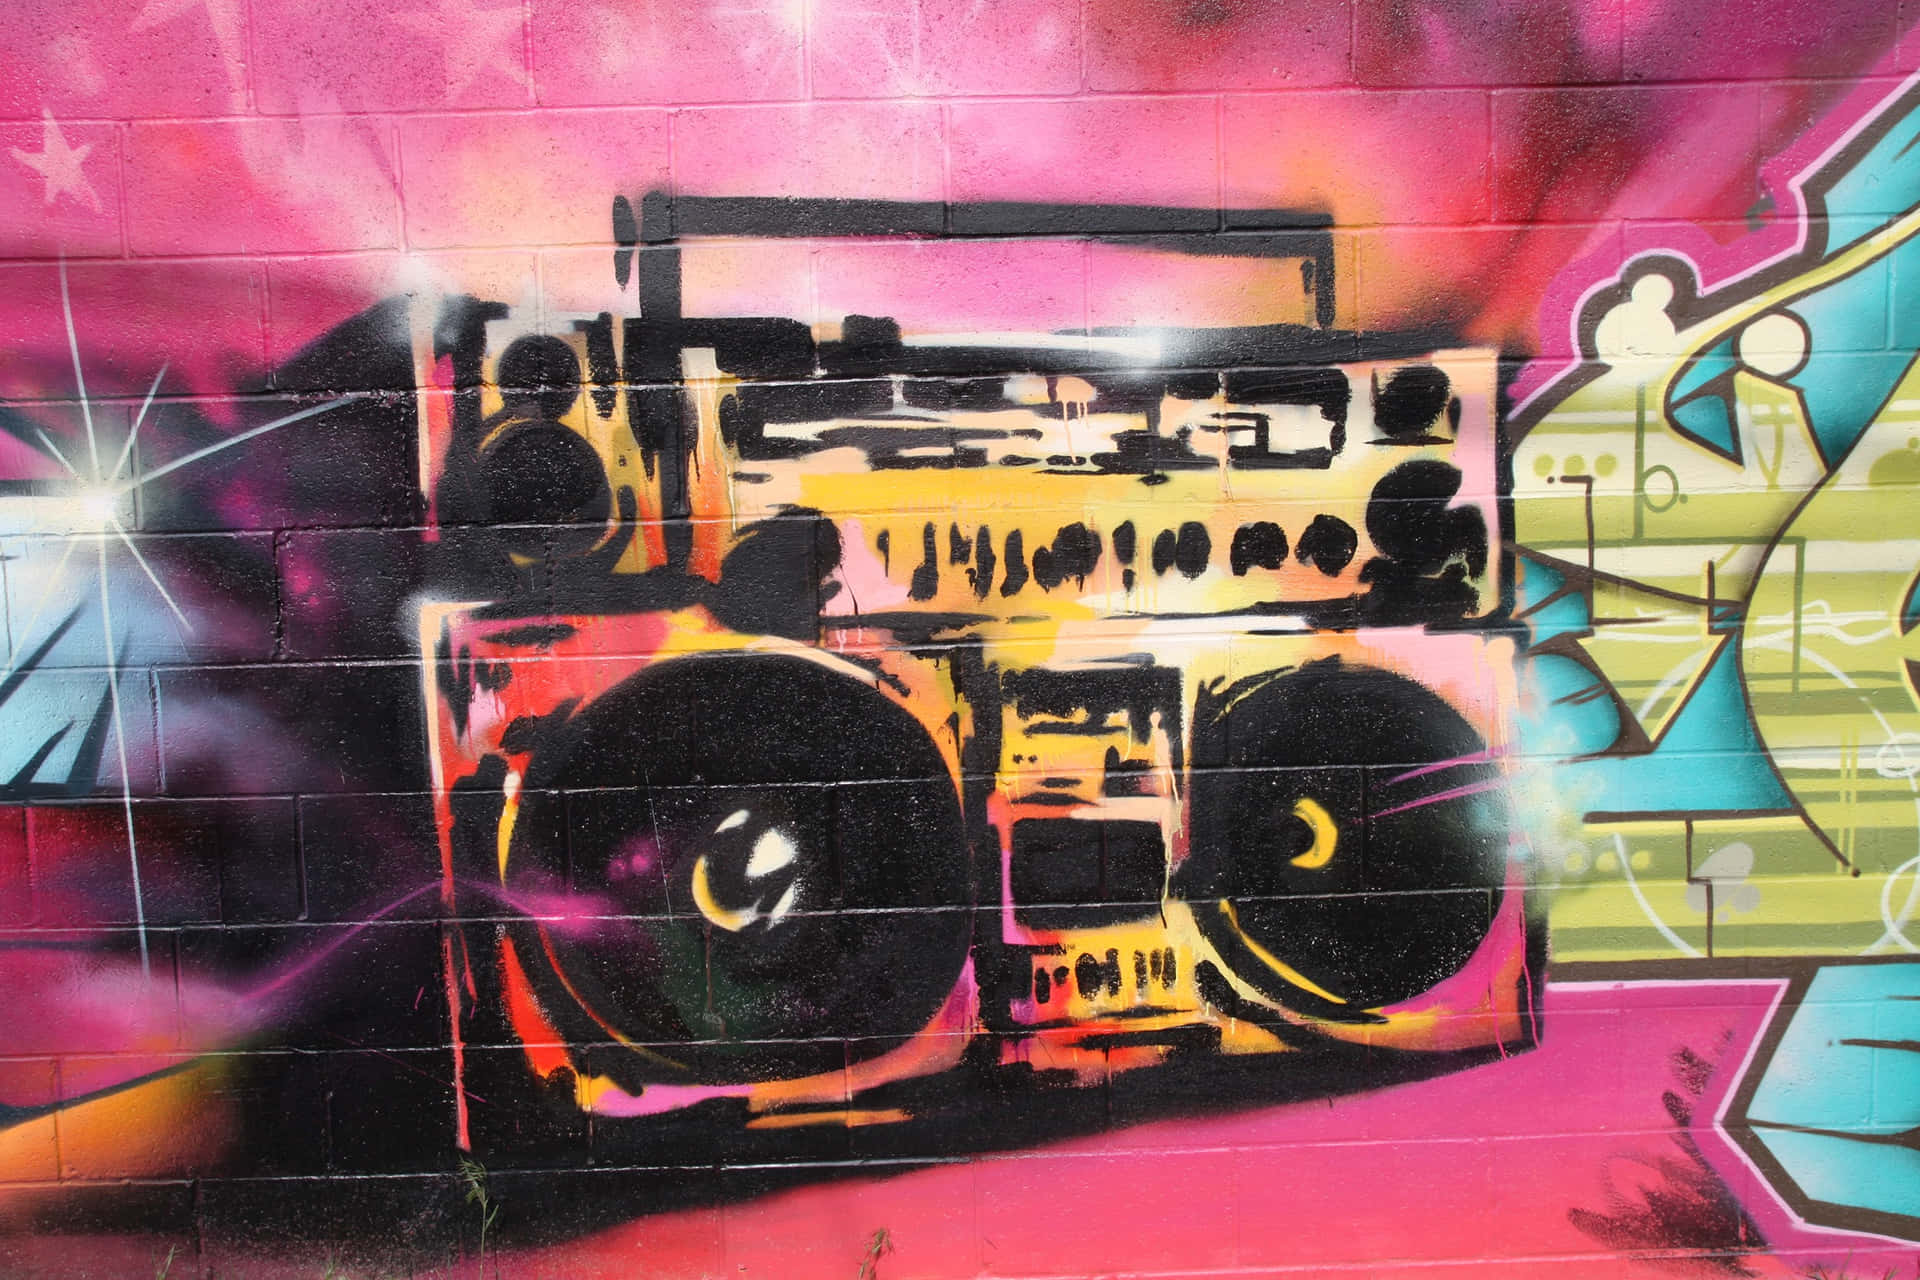 "The Fire of Hip-Hop Comes Alive in This Street Art" Wallpaper